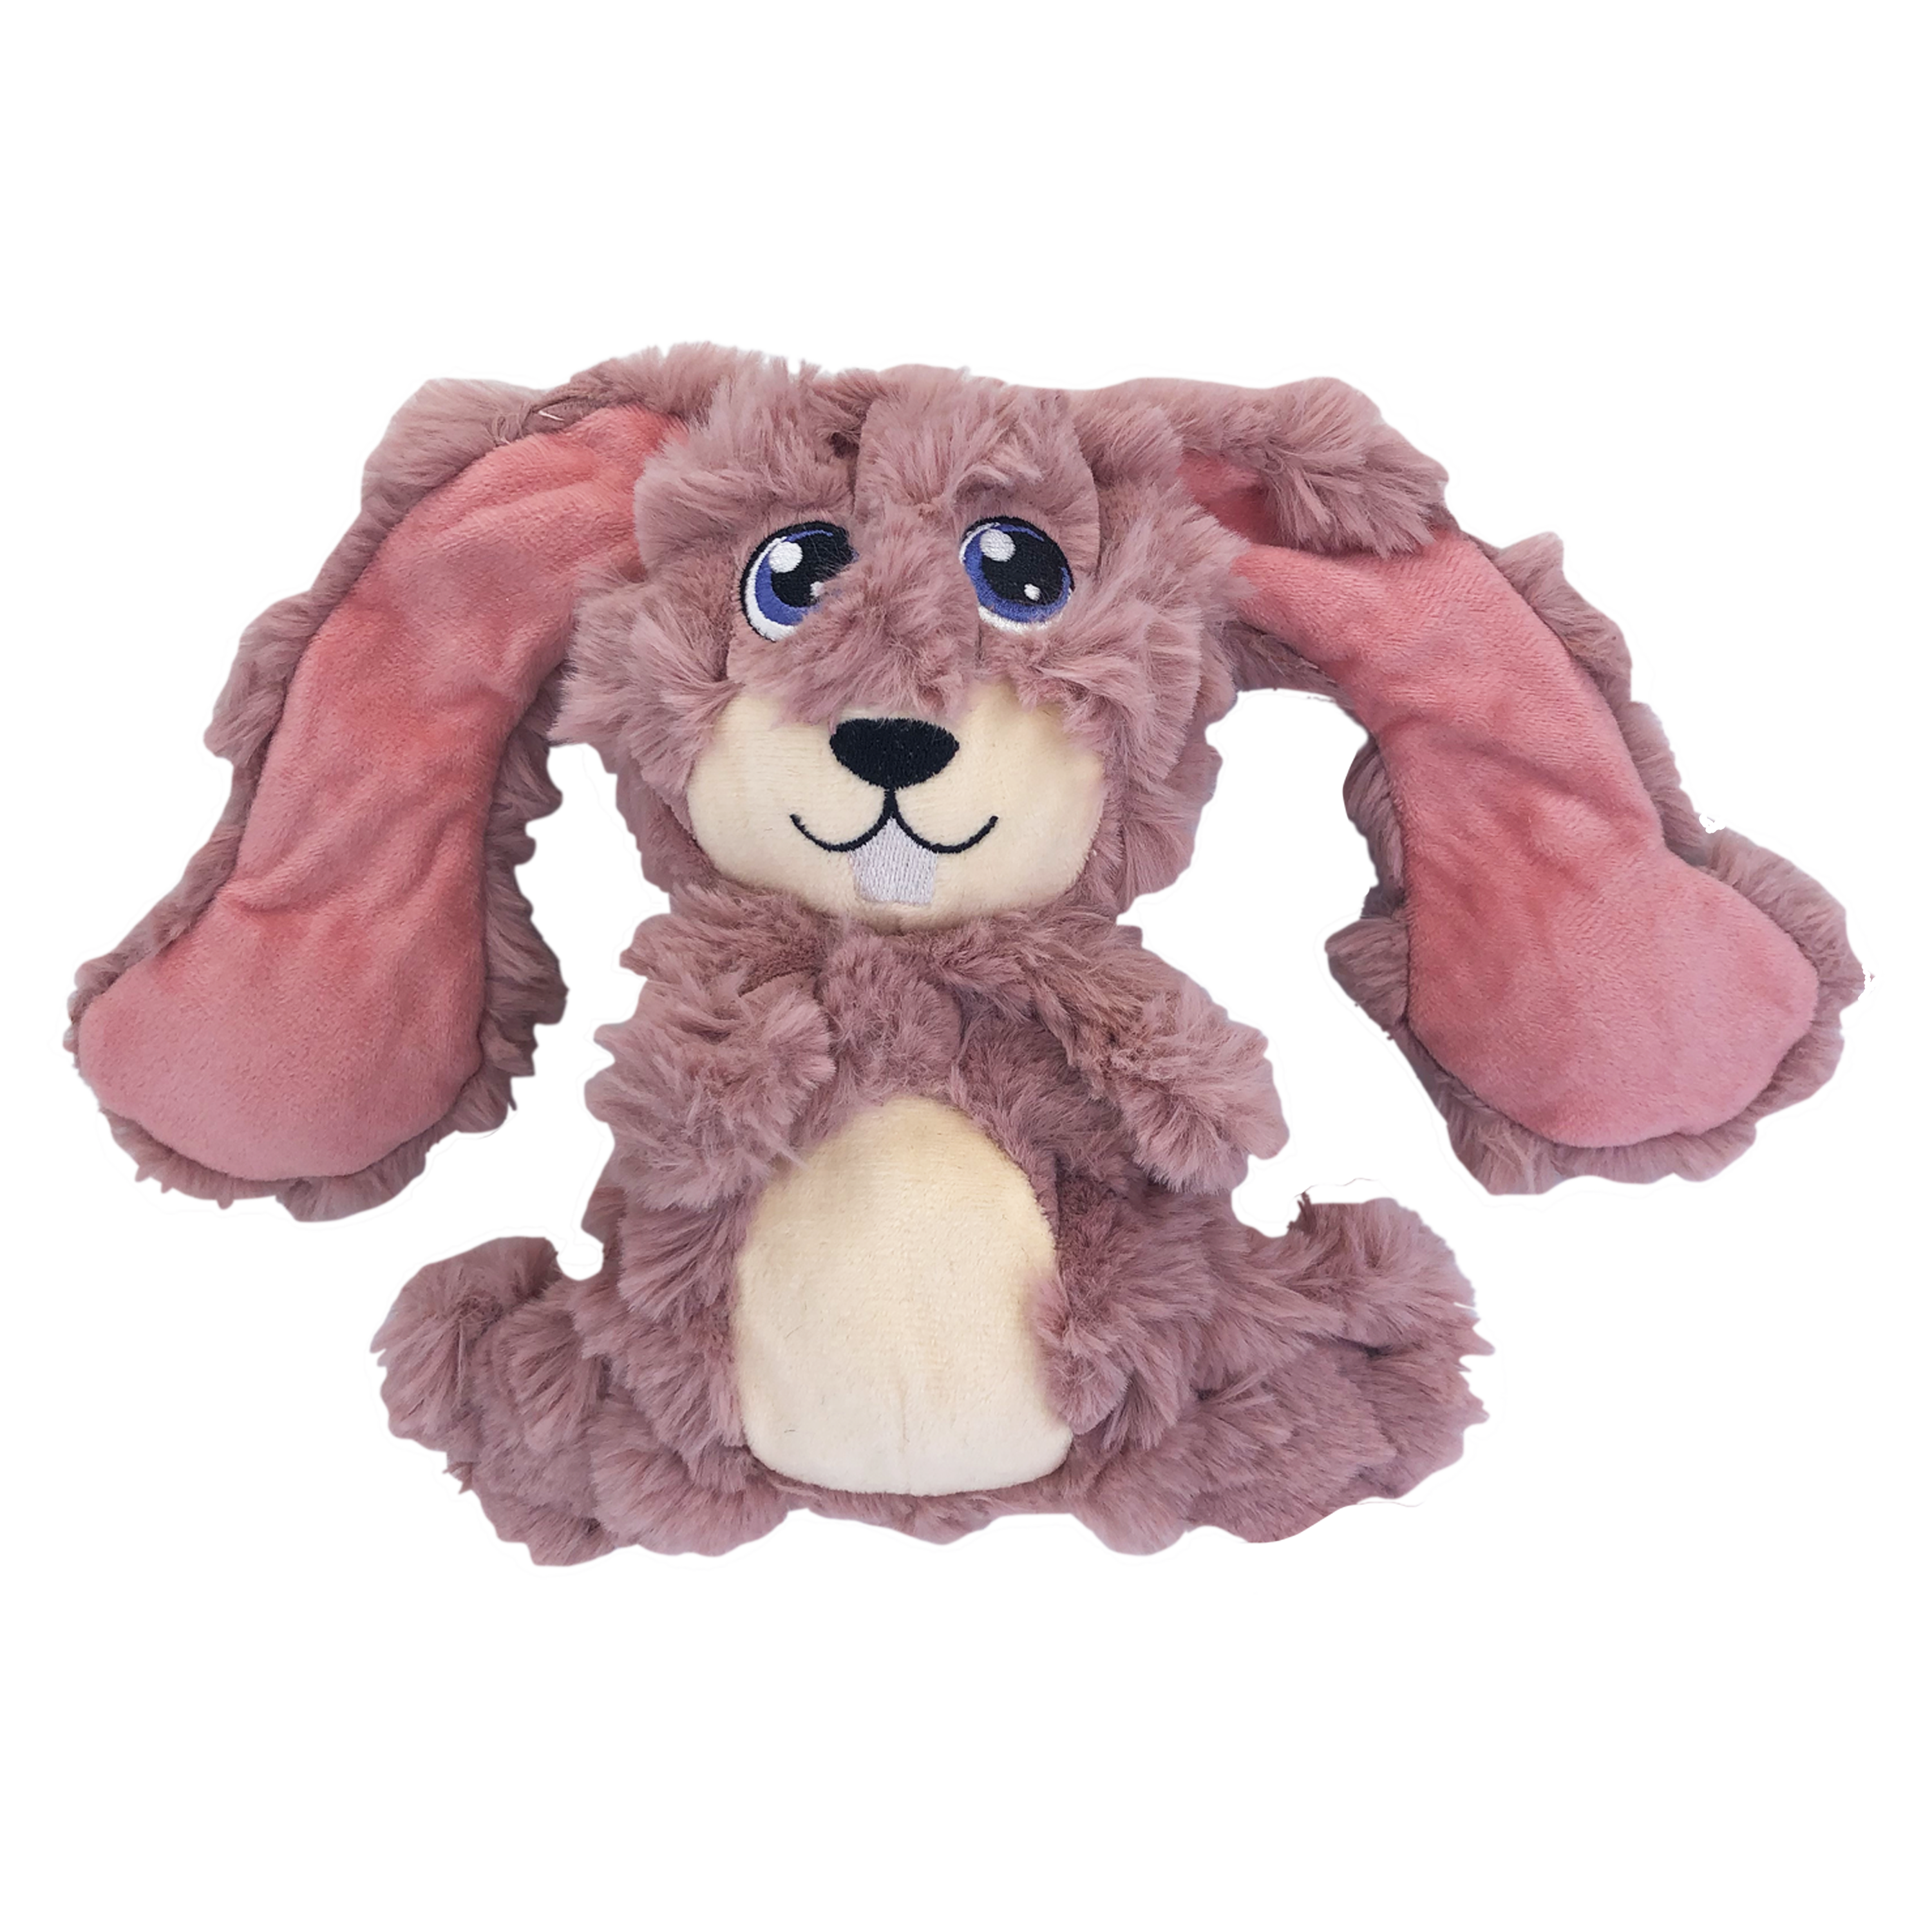 Scrumplez Bunny offpack product image